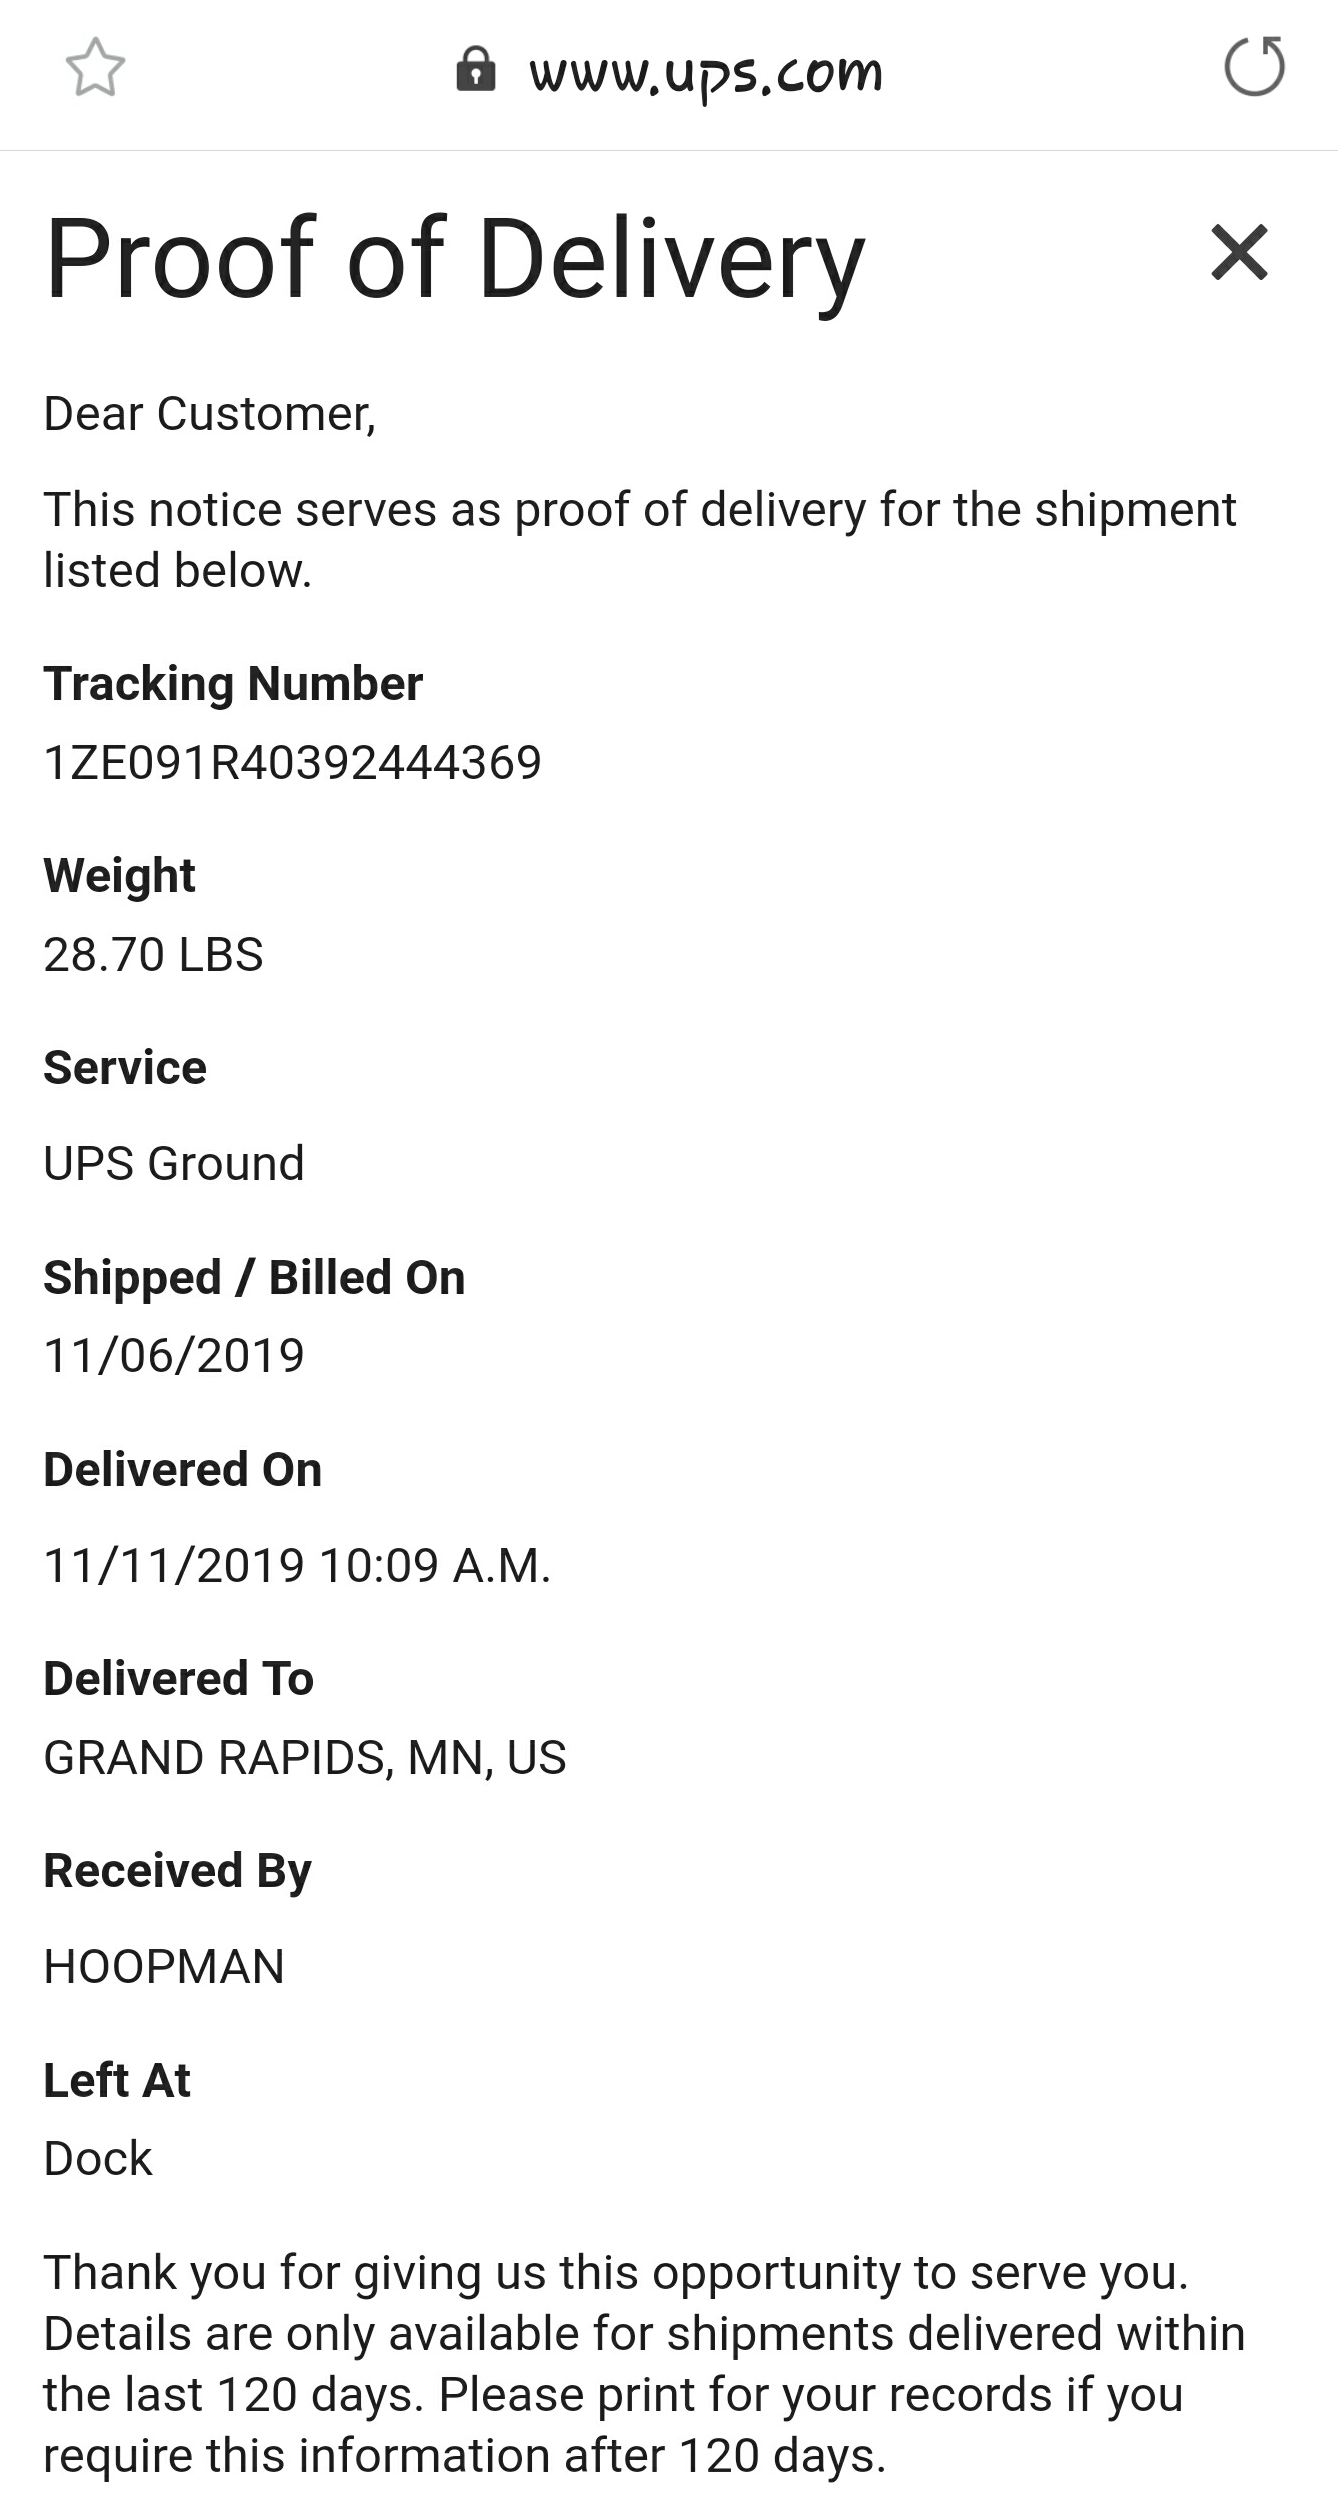 Proof of delivery by UPS (but not right address) 